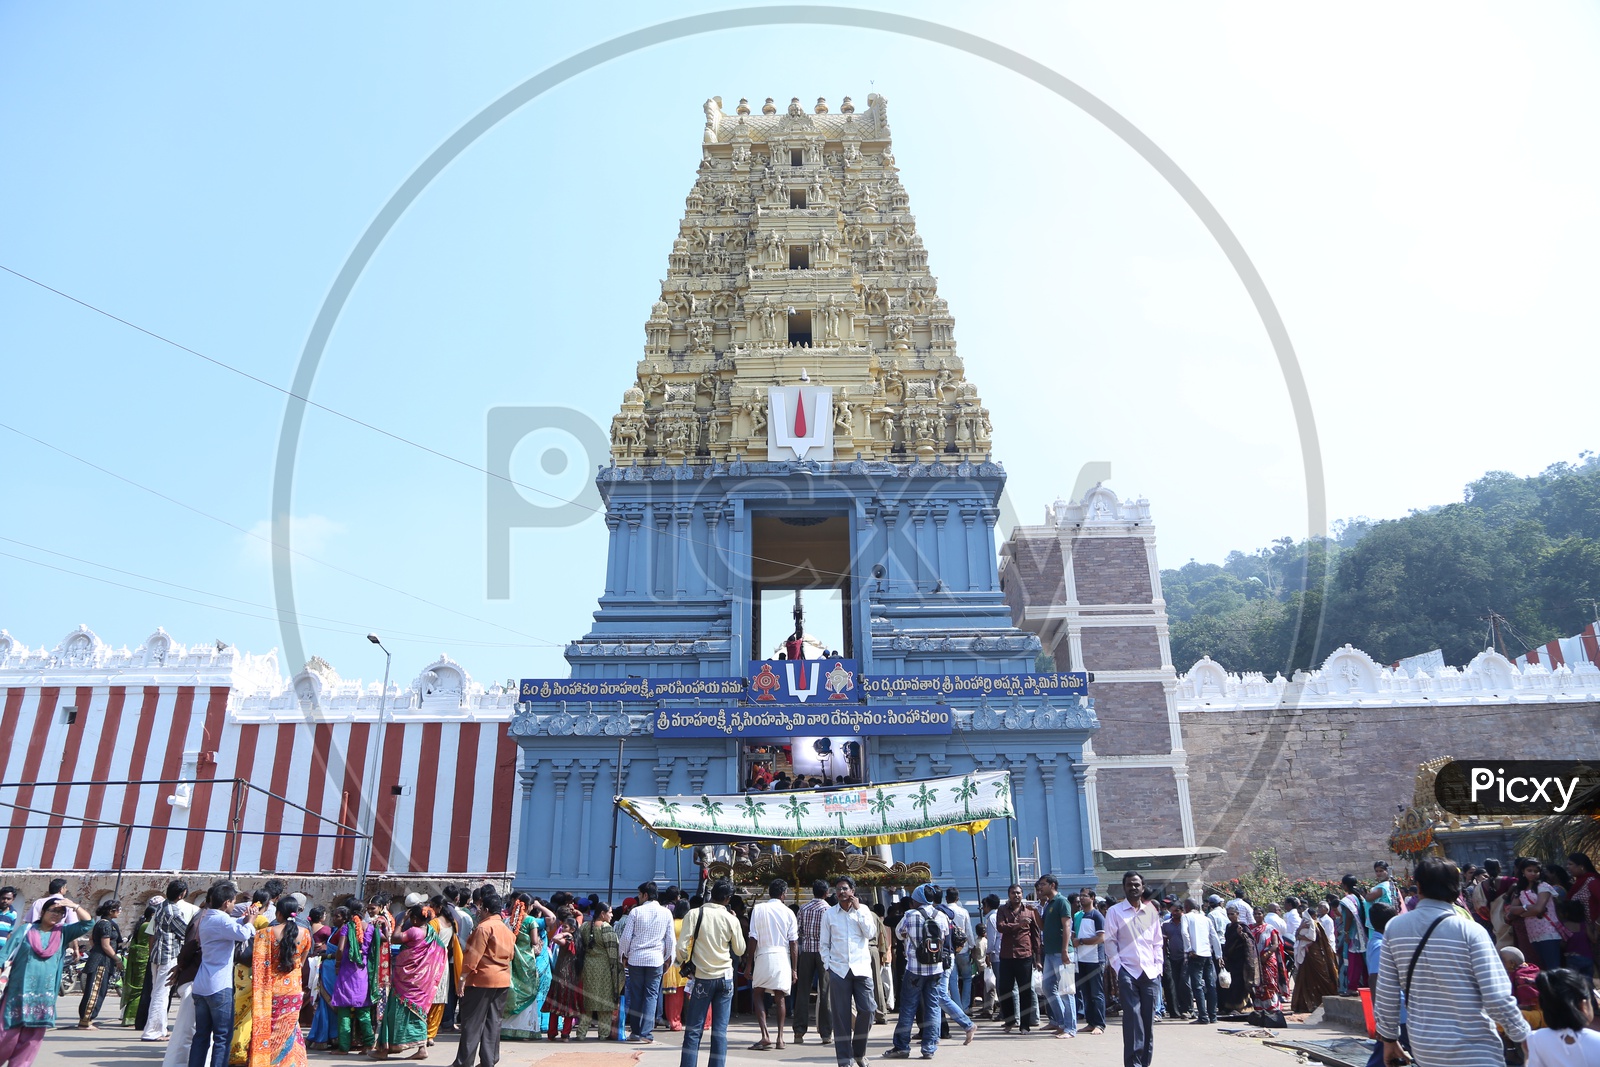 Devotees inside the Simhachalam temple